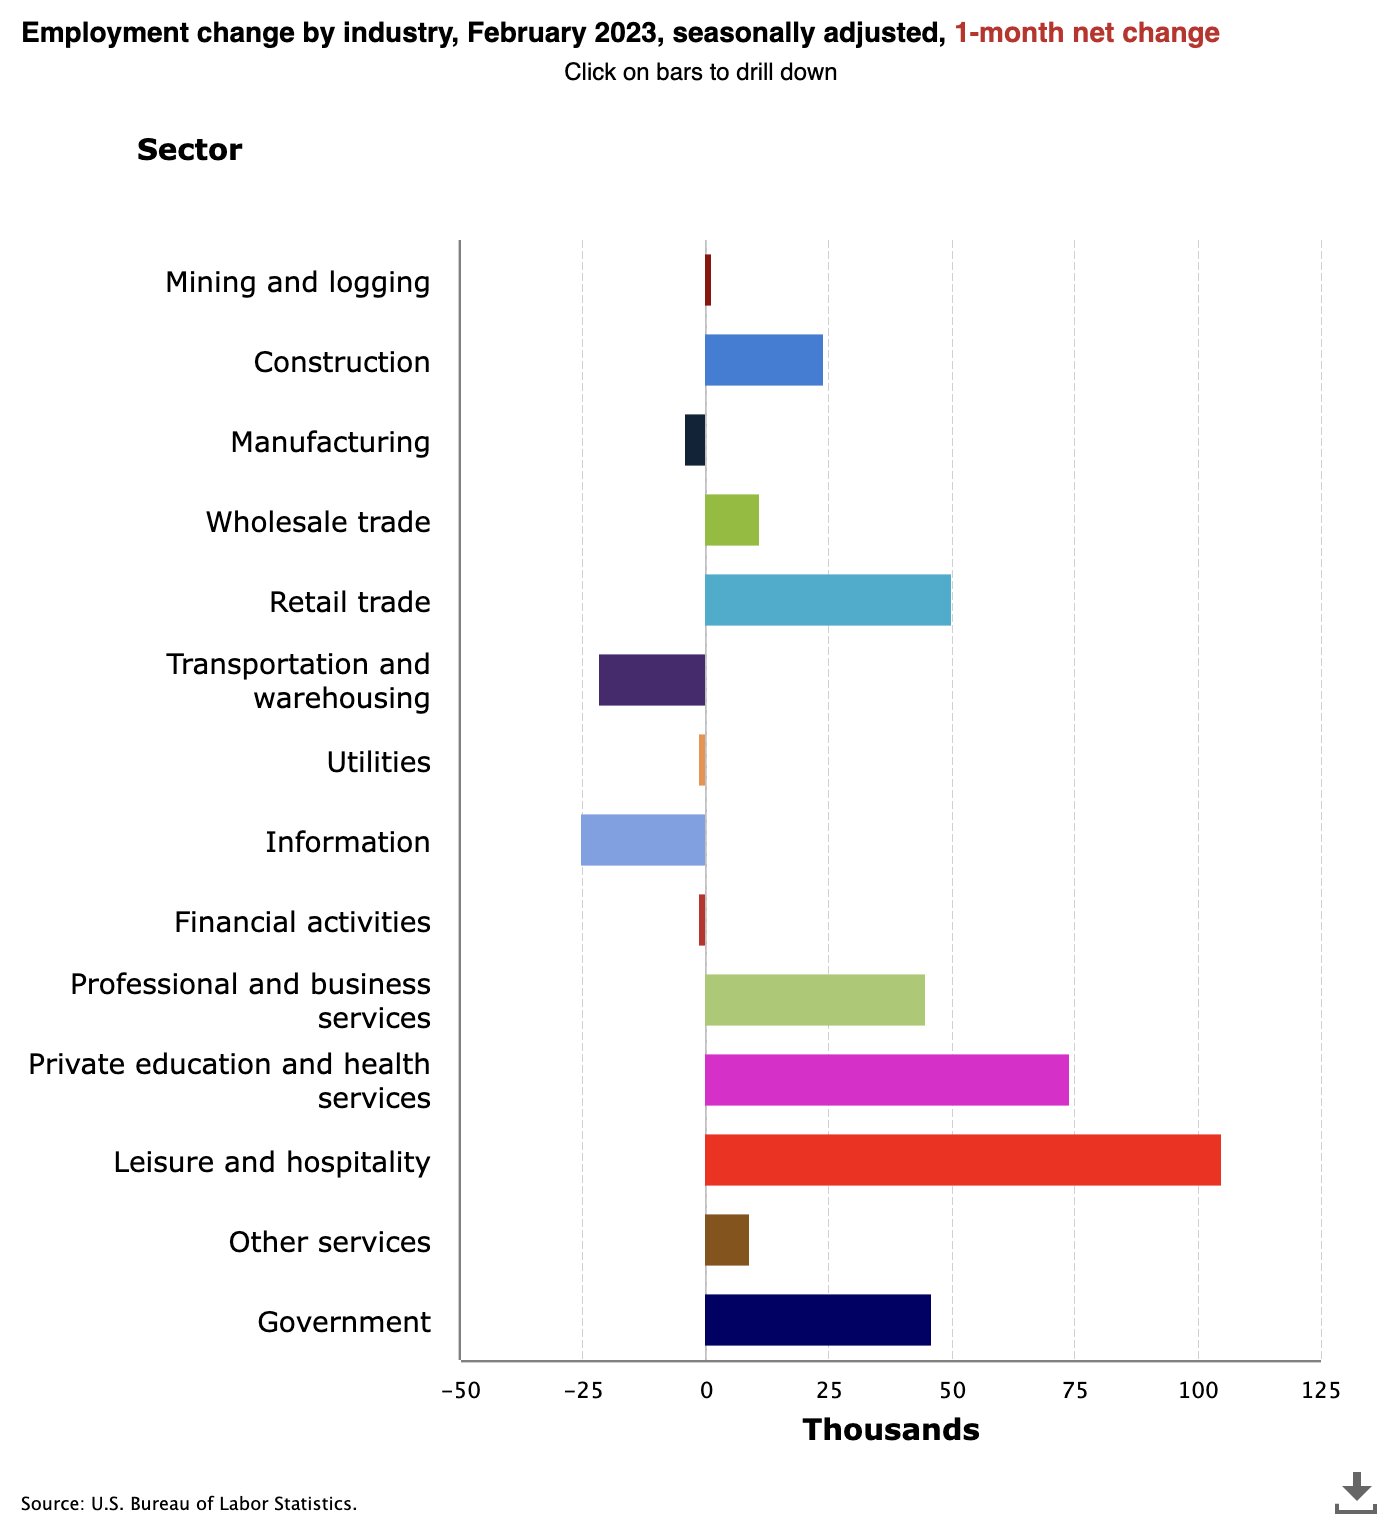 February 2023 jobs growth by sector, led by leisure, hospitality, retail - The Basis Point